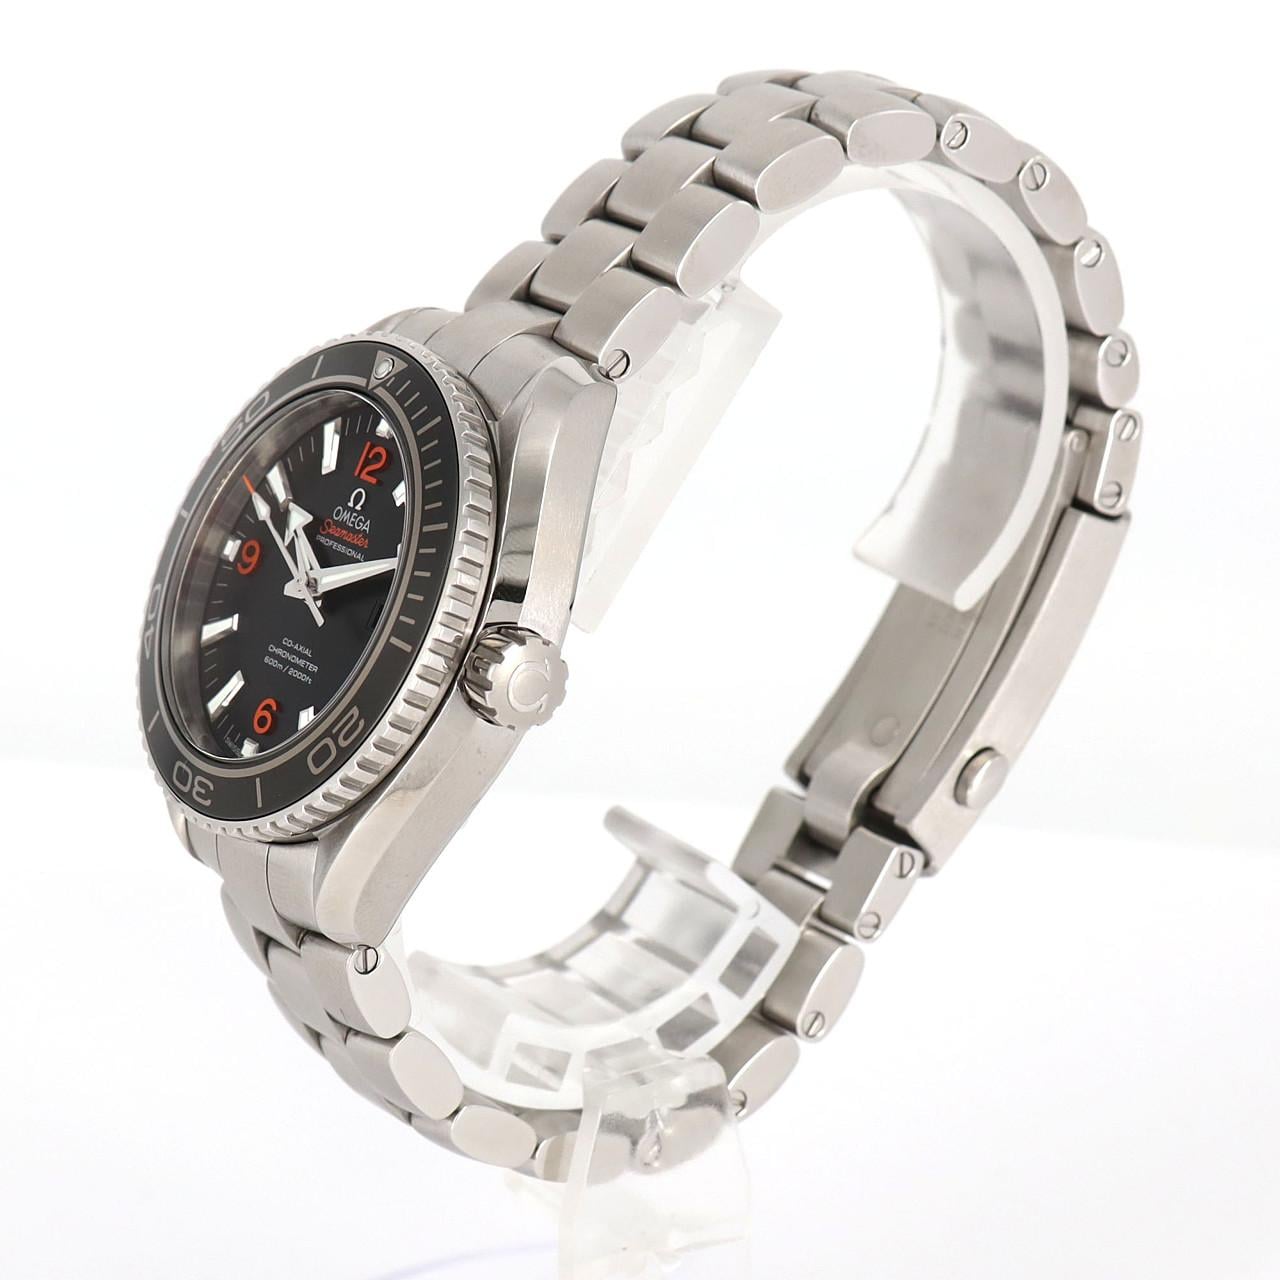 Omega Seamaster Planet Ocean 232.30.38.20.01.002 SS Automatic